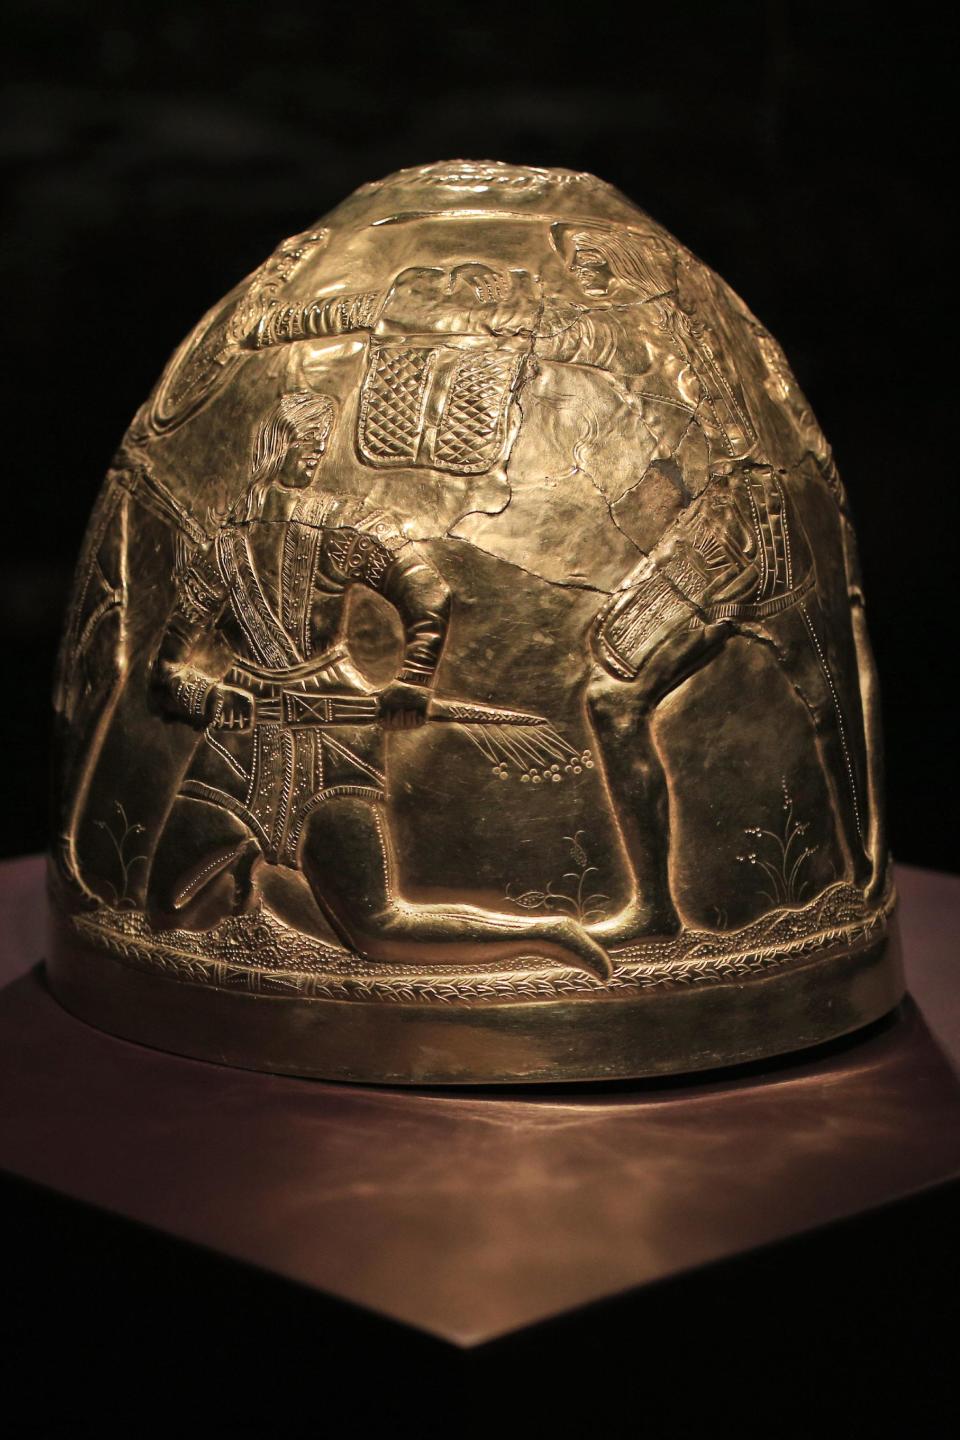 A Scythian gold helmet from the fourth century B.C. is displayed as part of the exhibit called The Crimea - Gold and Secrets of the Black Sea, at Allard Pierson historical museum in Amsterdam Friday April 4, 2014. The museum has gotten more than the bronze swords, golden helmets and precious gems it bargained for as it is unsure where to return the collection after Russia annexed Crimea. (AP Photo/Peter Dejong)